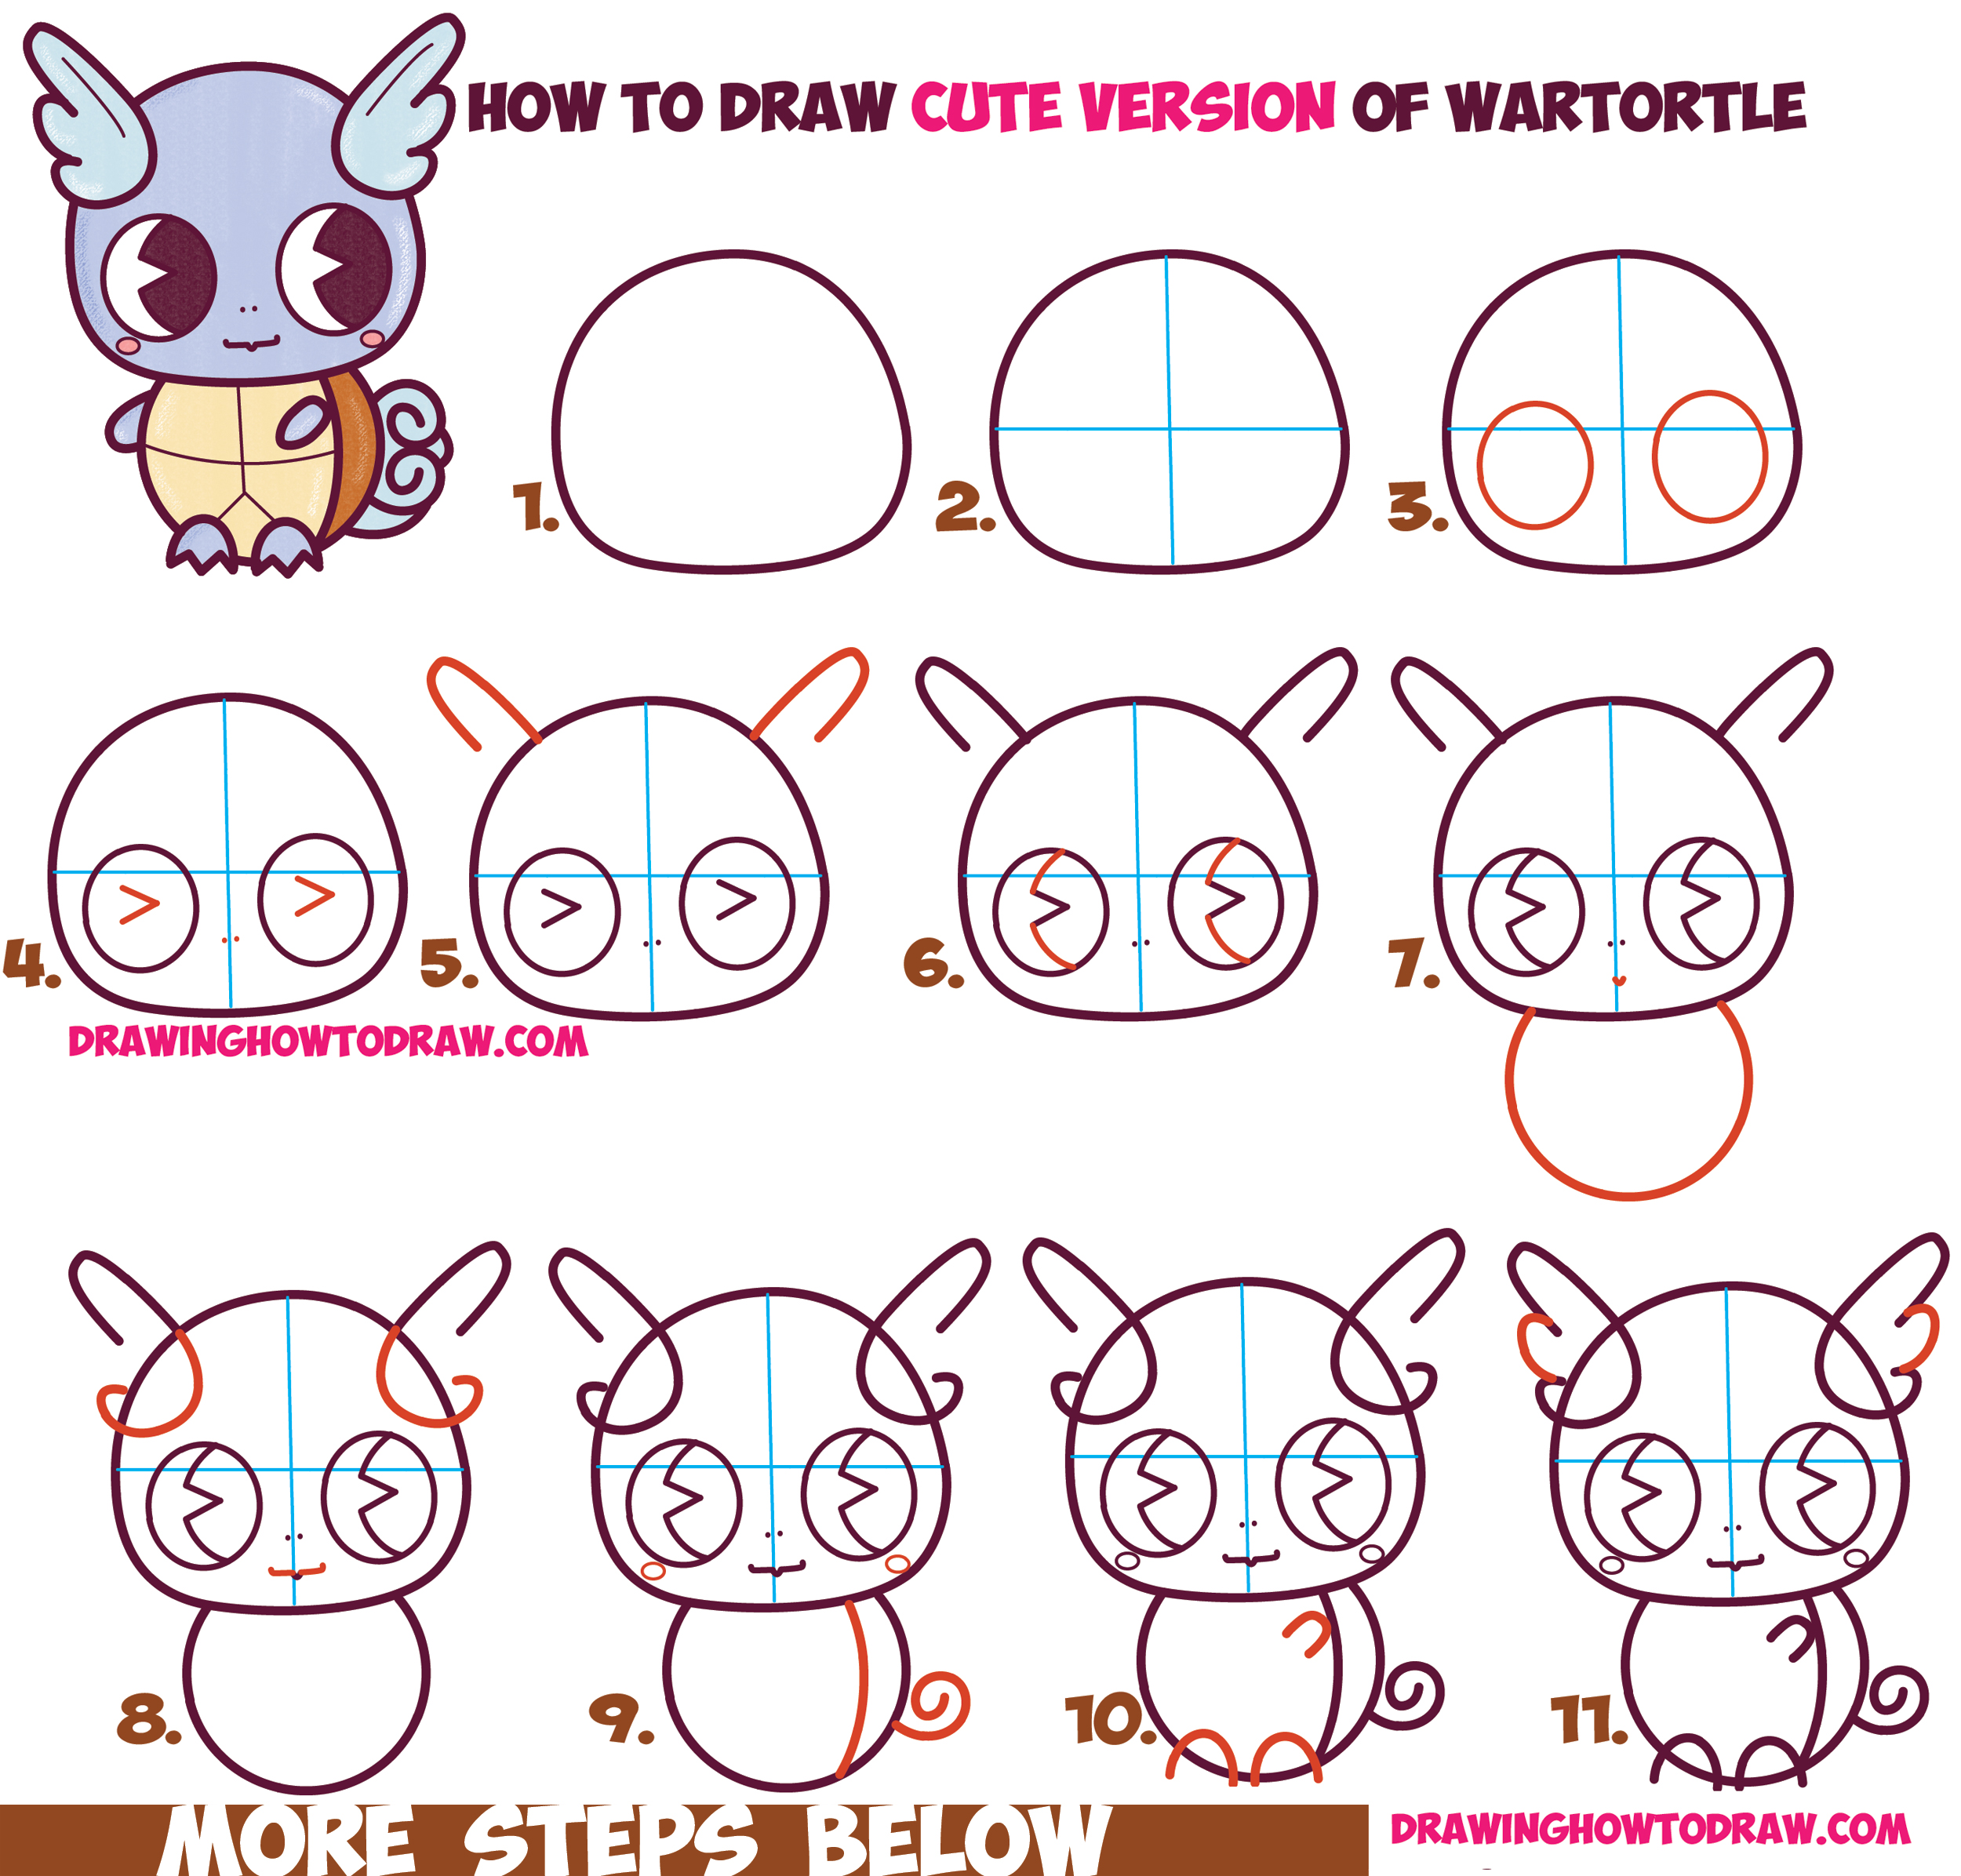 How to Draw Cute / Chibi / Kawaii Wartortle from Pokemon Easy Step by